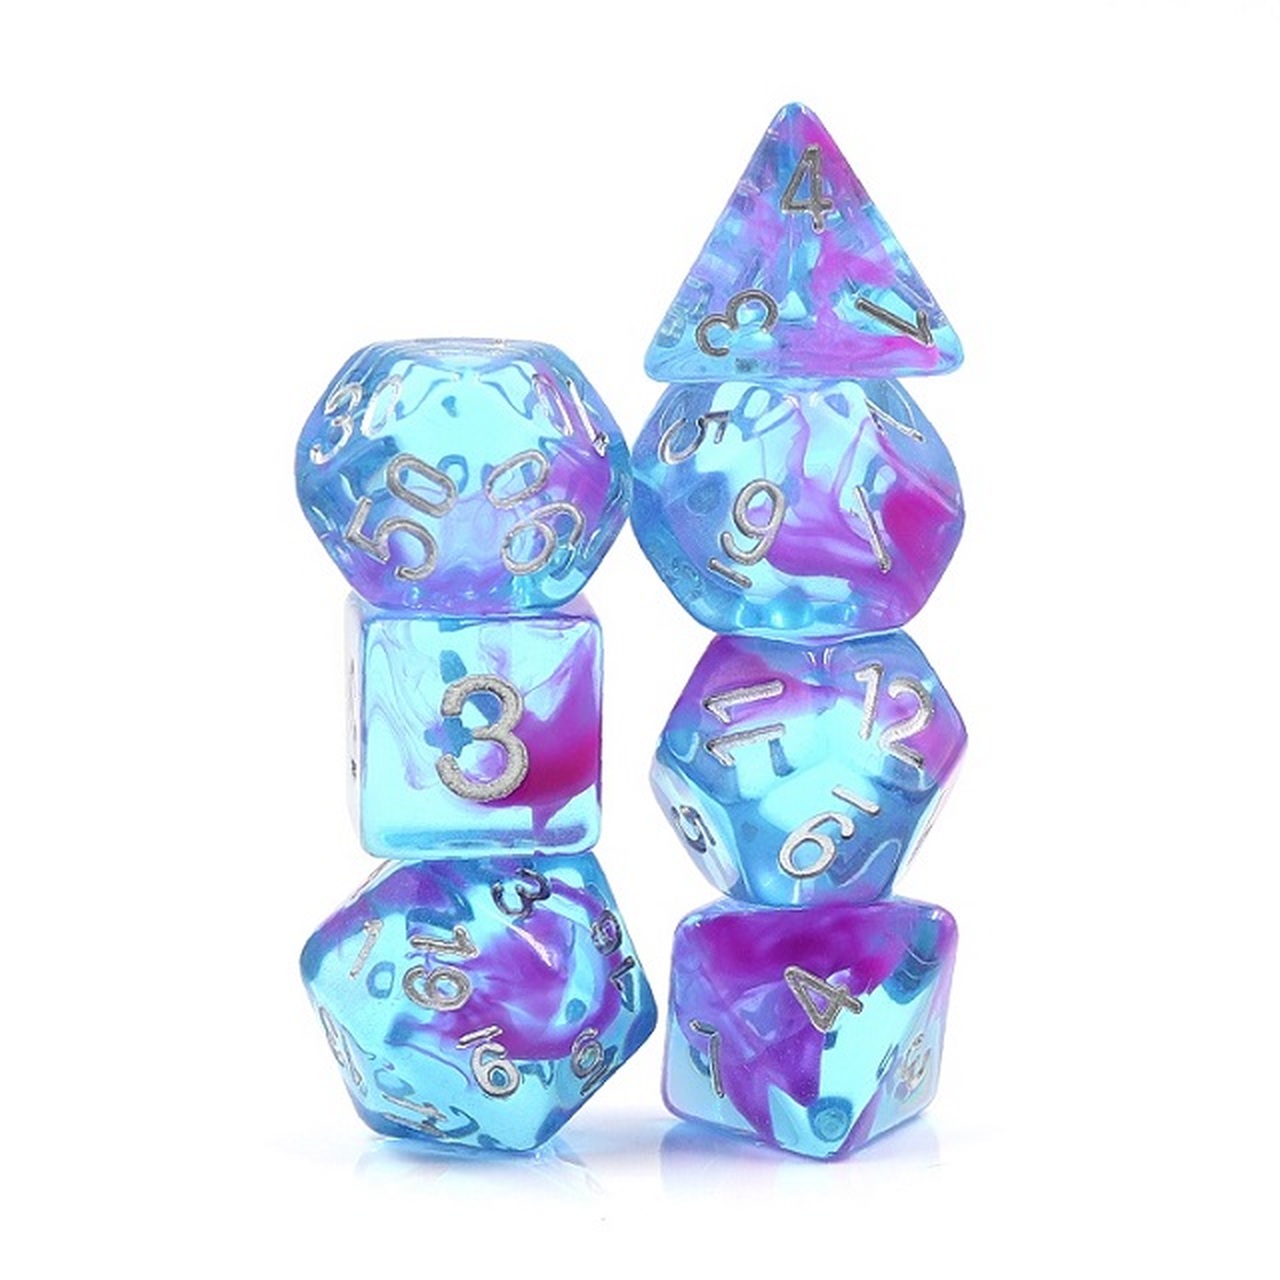 DND dice that are blue and semi-transparent with purple strands inside that look like smoke.